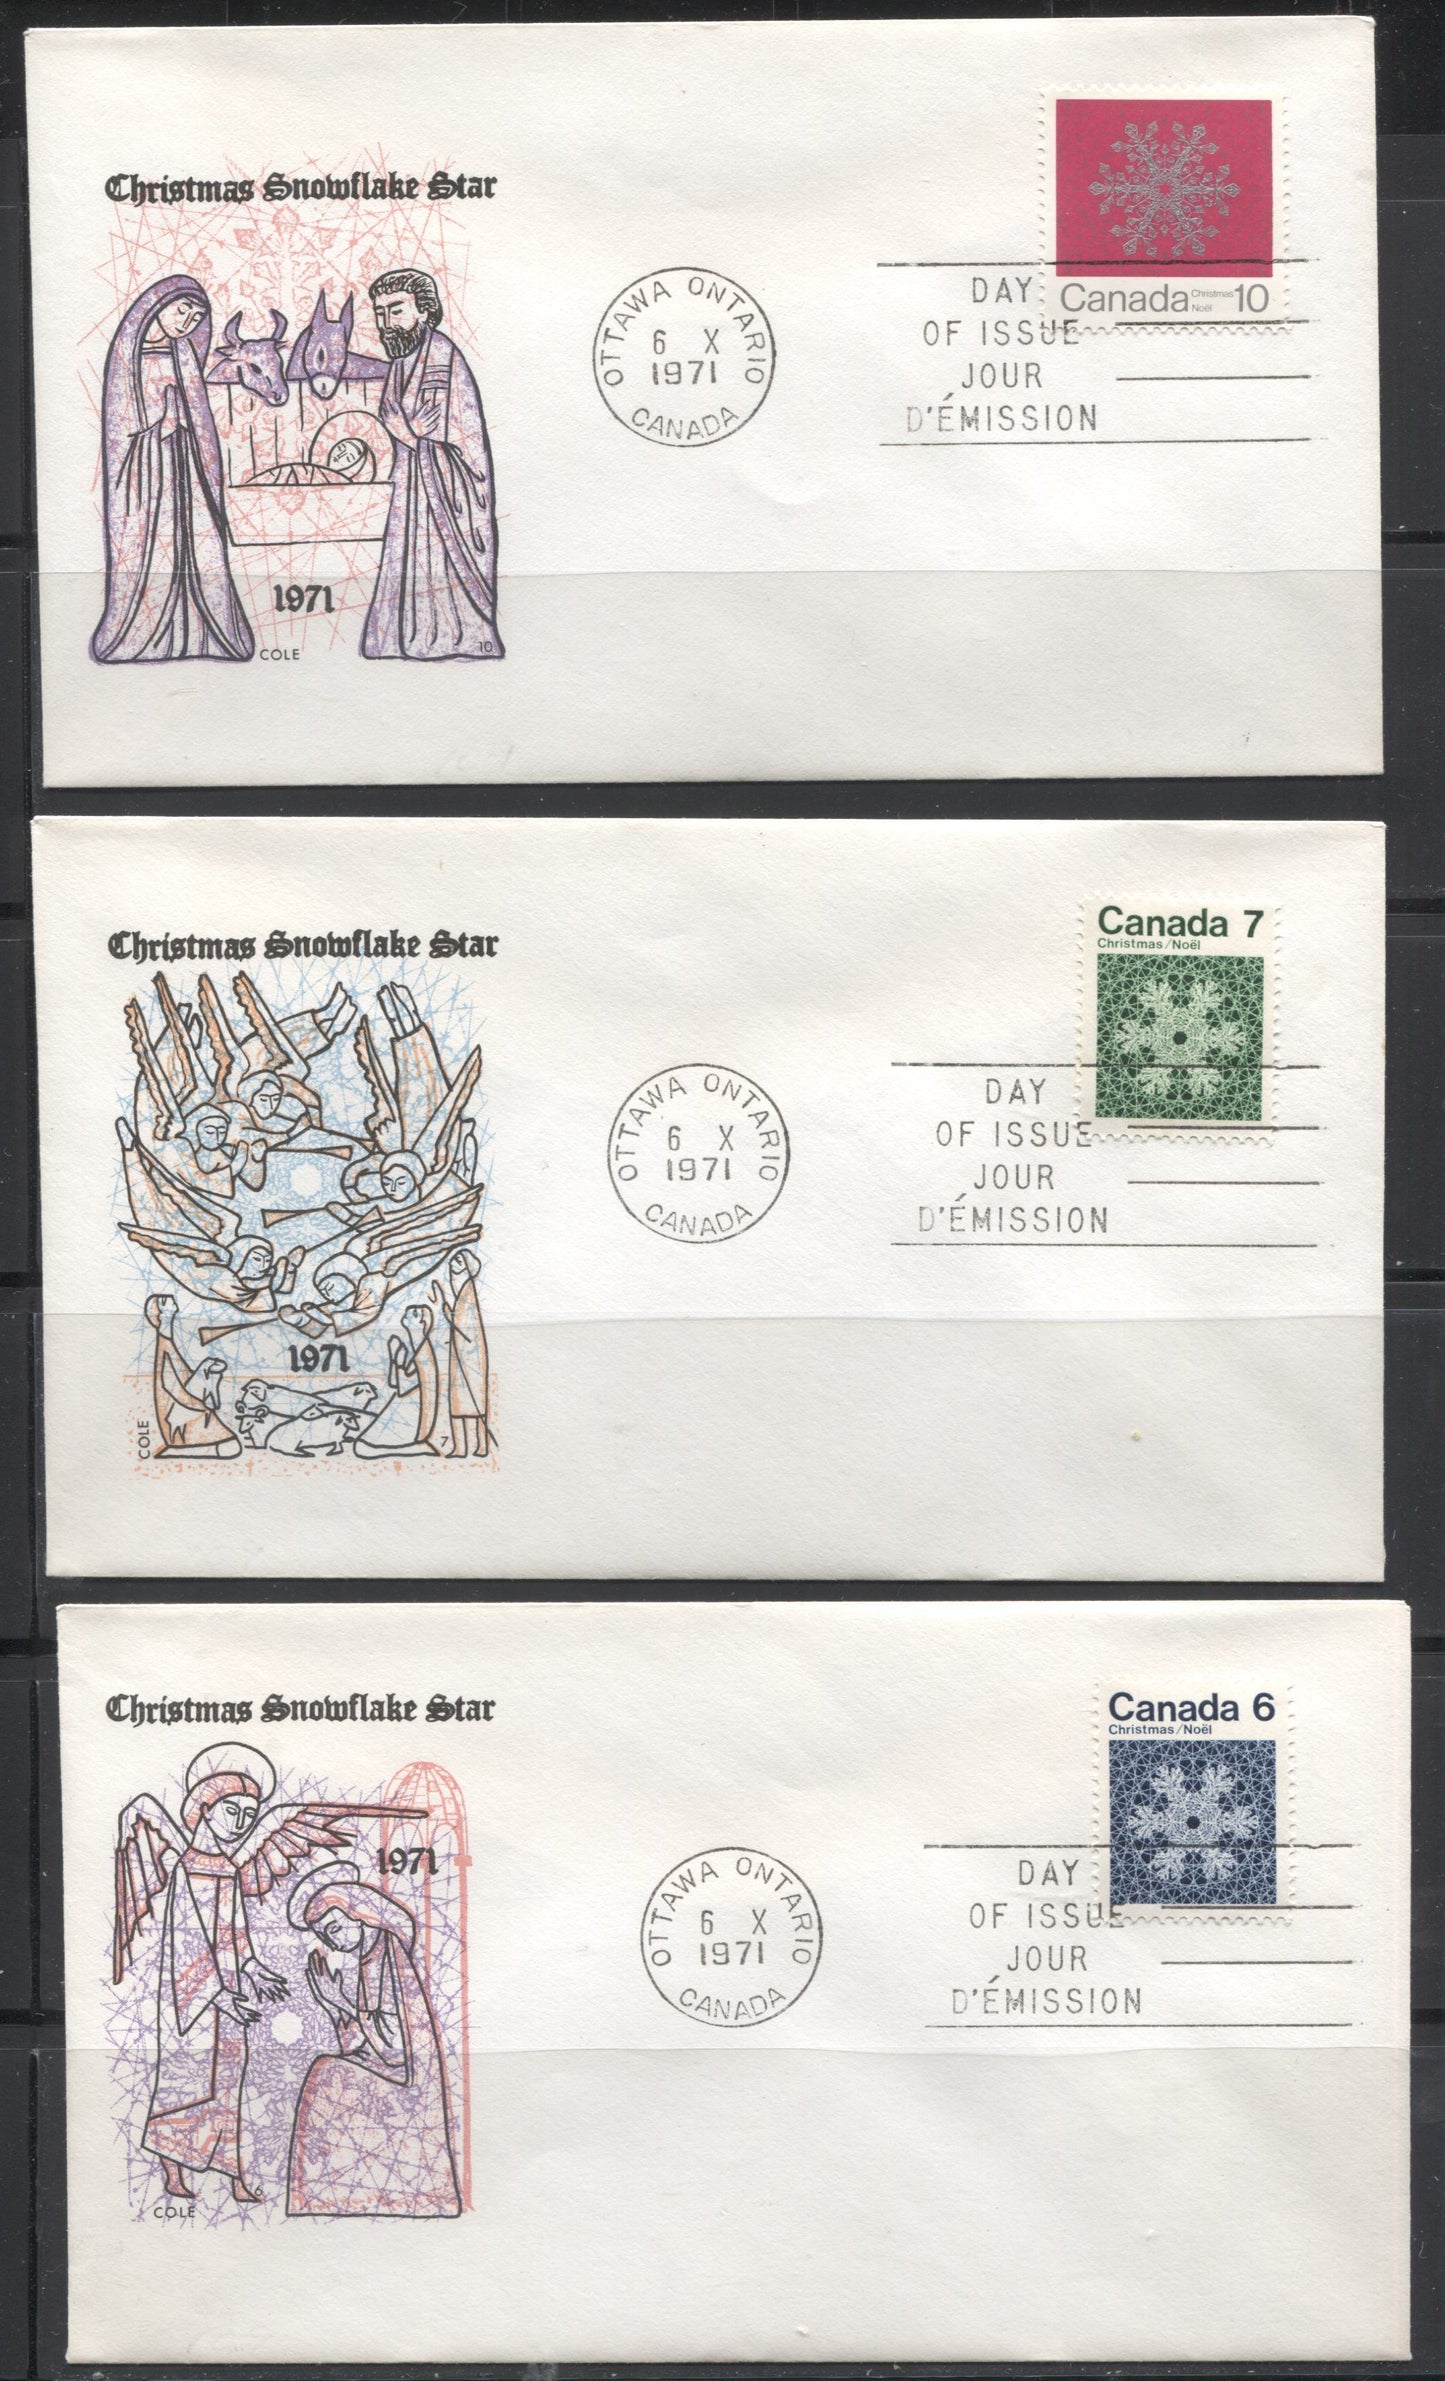 Lot 187 Canada #554-557i 1971 Christmas, Six Cole and Rosecraft First Day Covers, Including Both 10c and 15c Values on the Scarce Horizontal Ribbed Paper